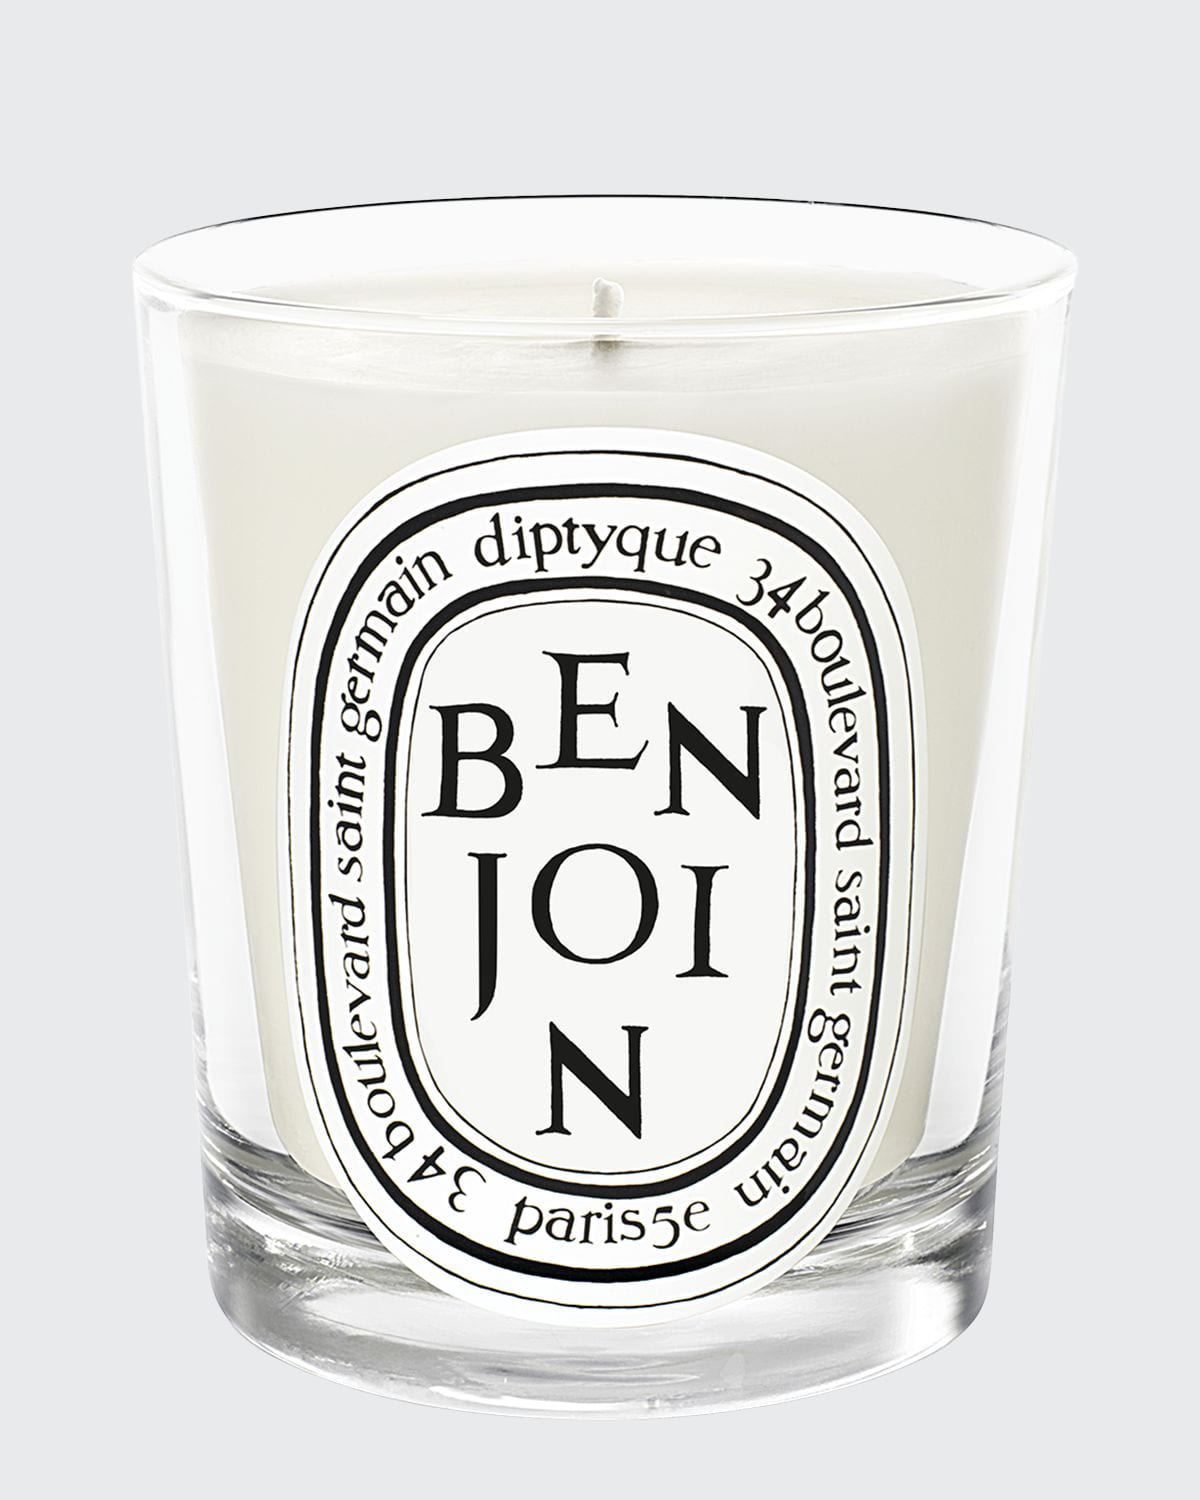 DIPTYQUE Benjoin Scented Candle, 6.5 oz.